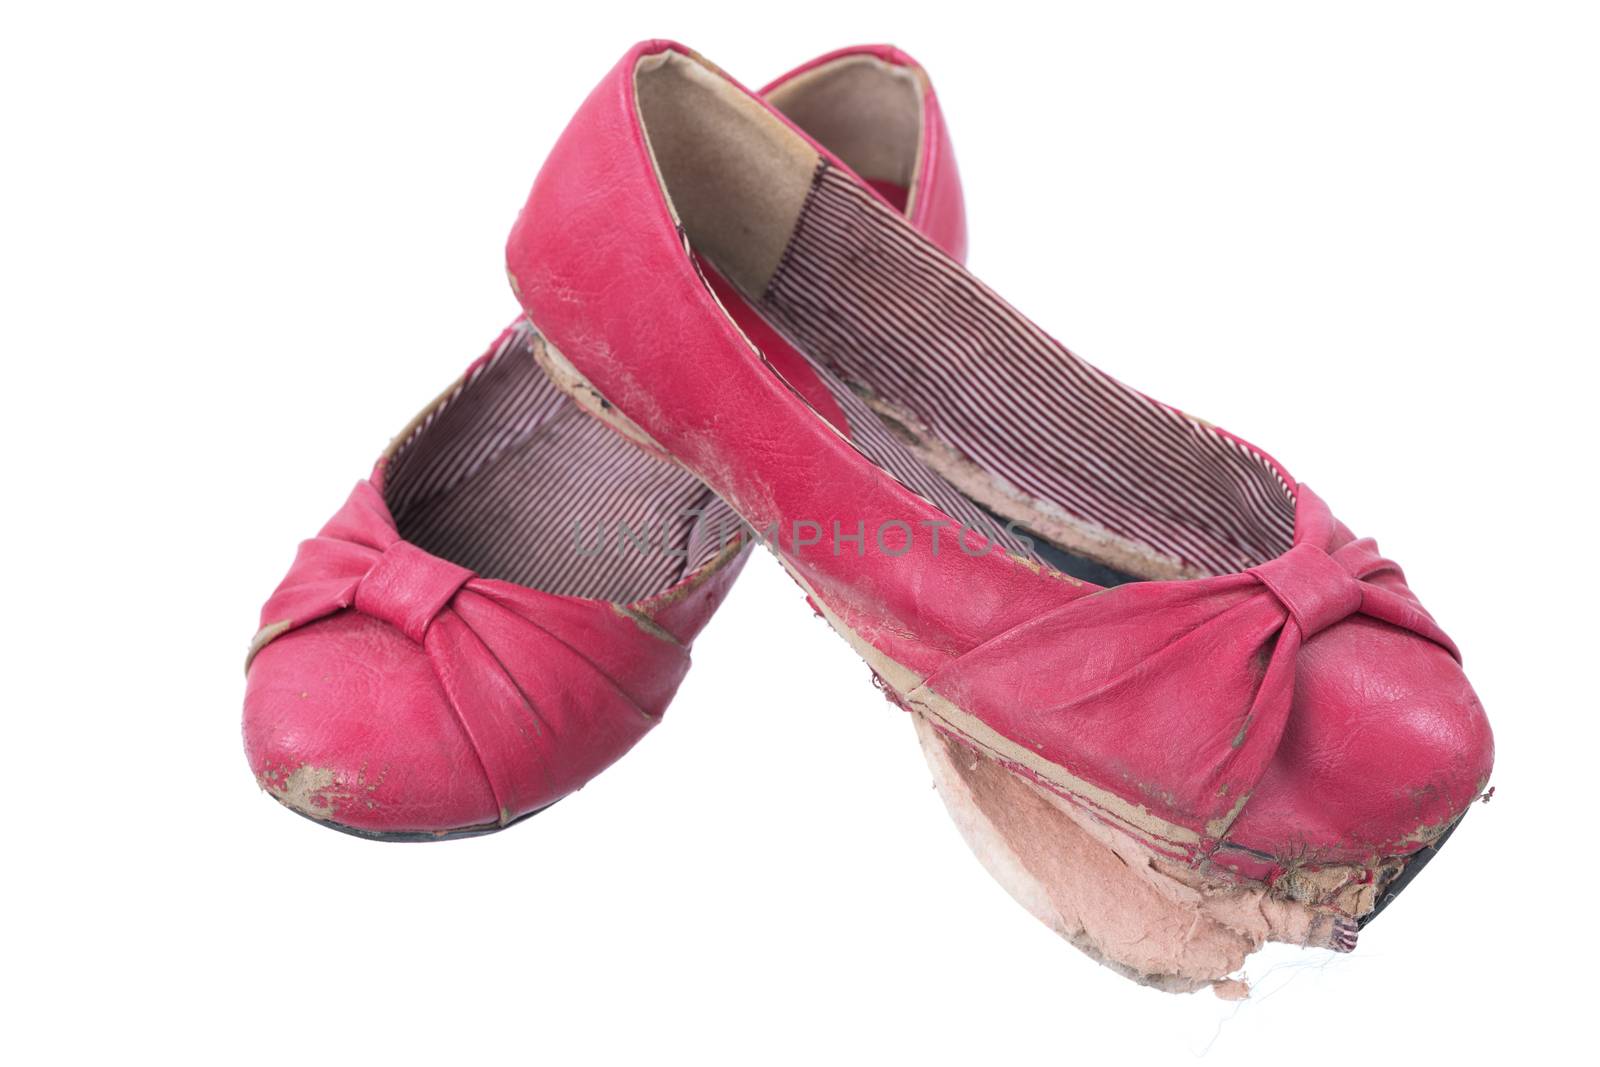 A pair of old, dirty and worn out red women's flats isolated on a white background.